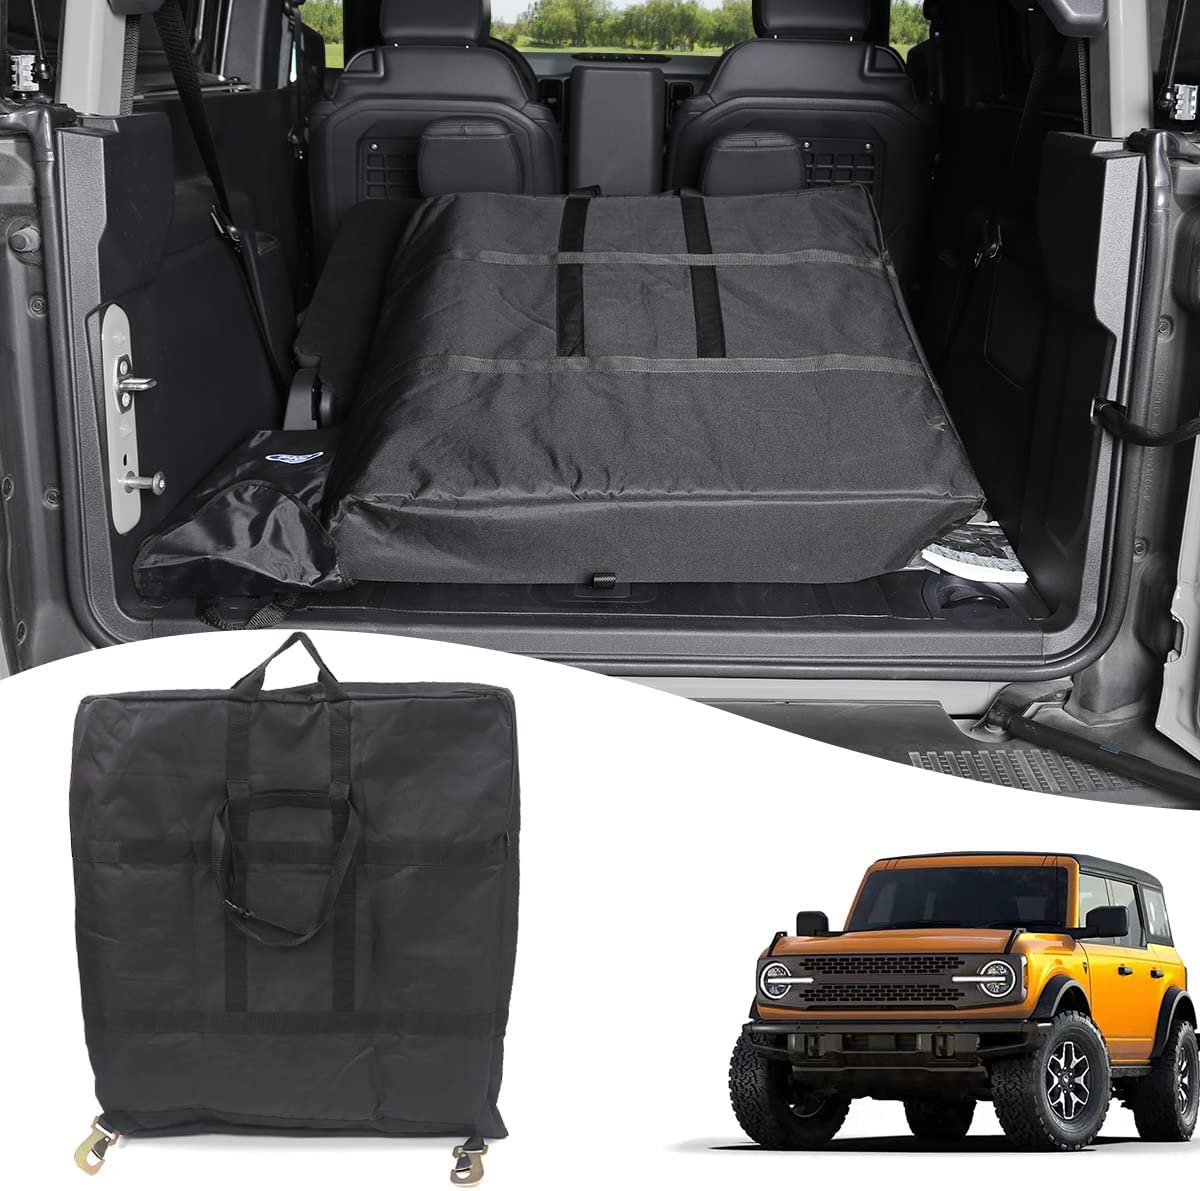 Freedom Panel Hard Top Organizer Bag with Handle Car Top Panel Protector Bag for 2021 2022 Ford Bronco Accessories